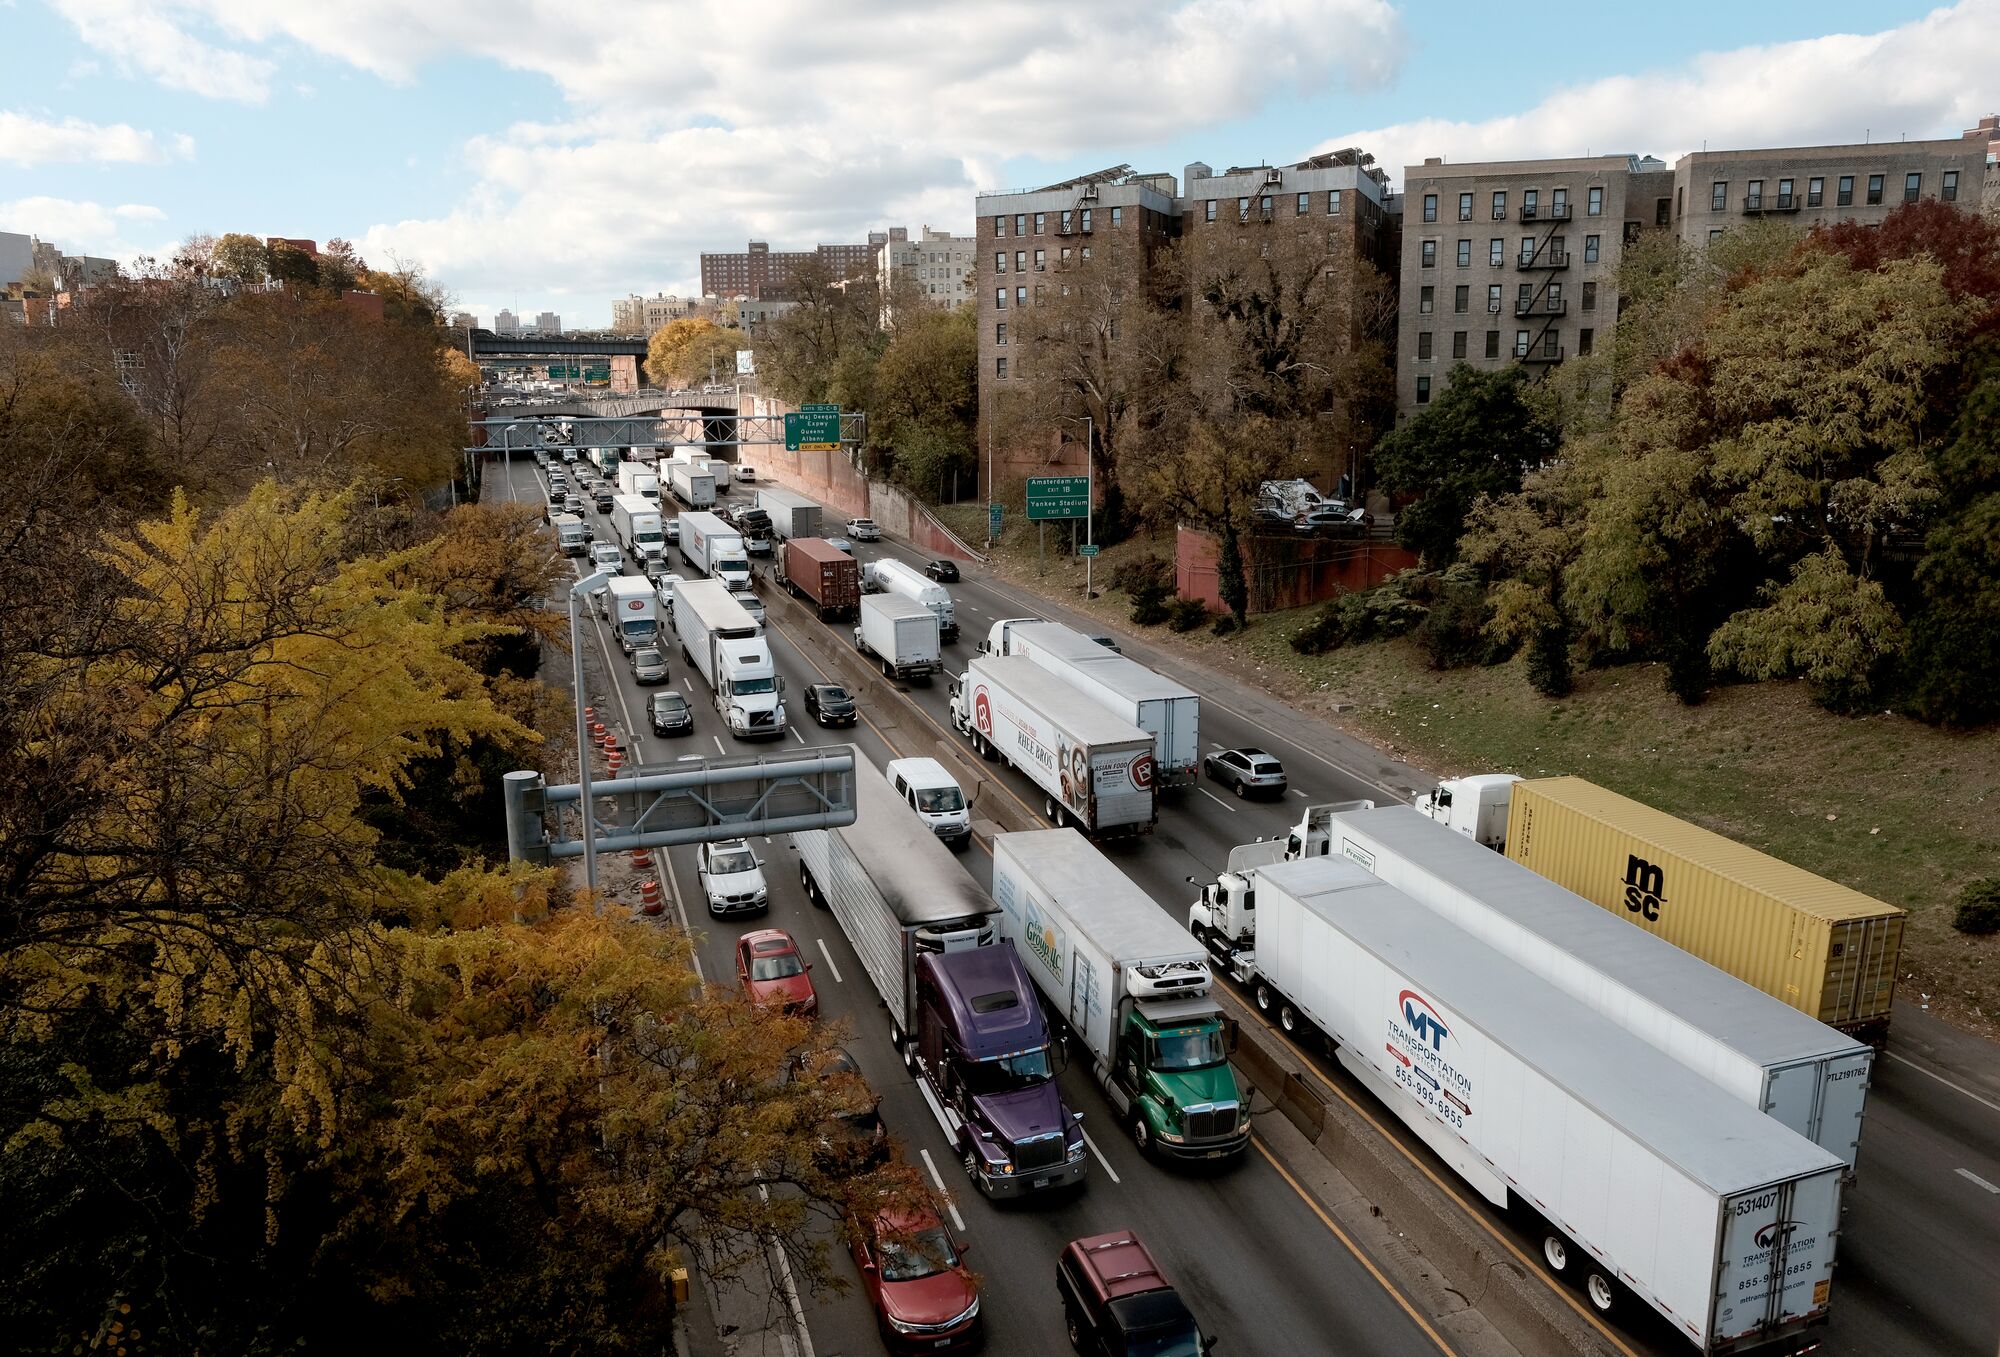 Aerial view of a freeway crowded with trucks and other vehicle traffic in New York.